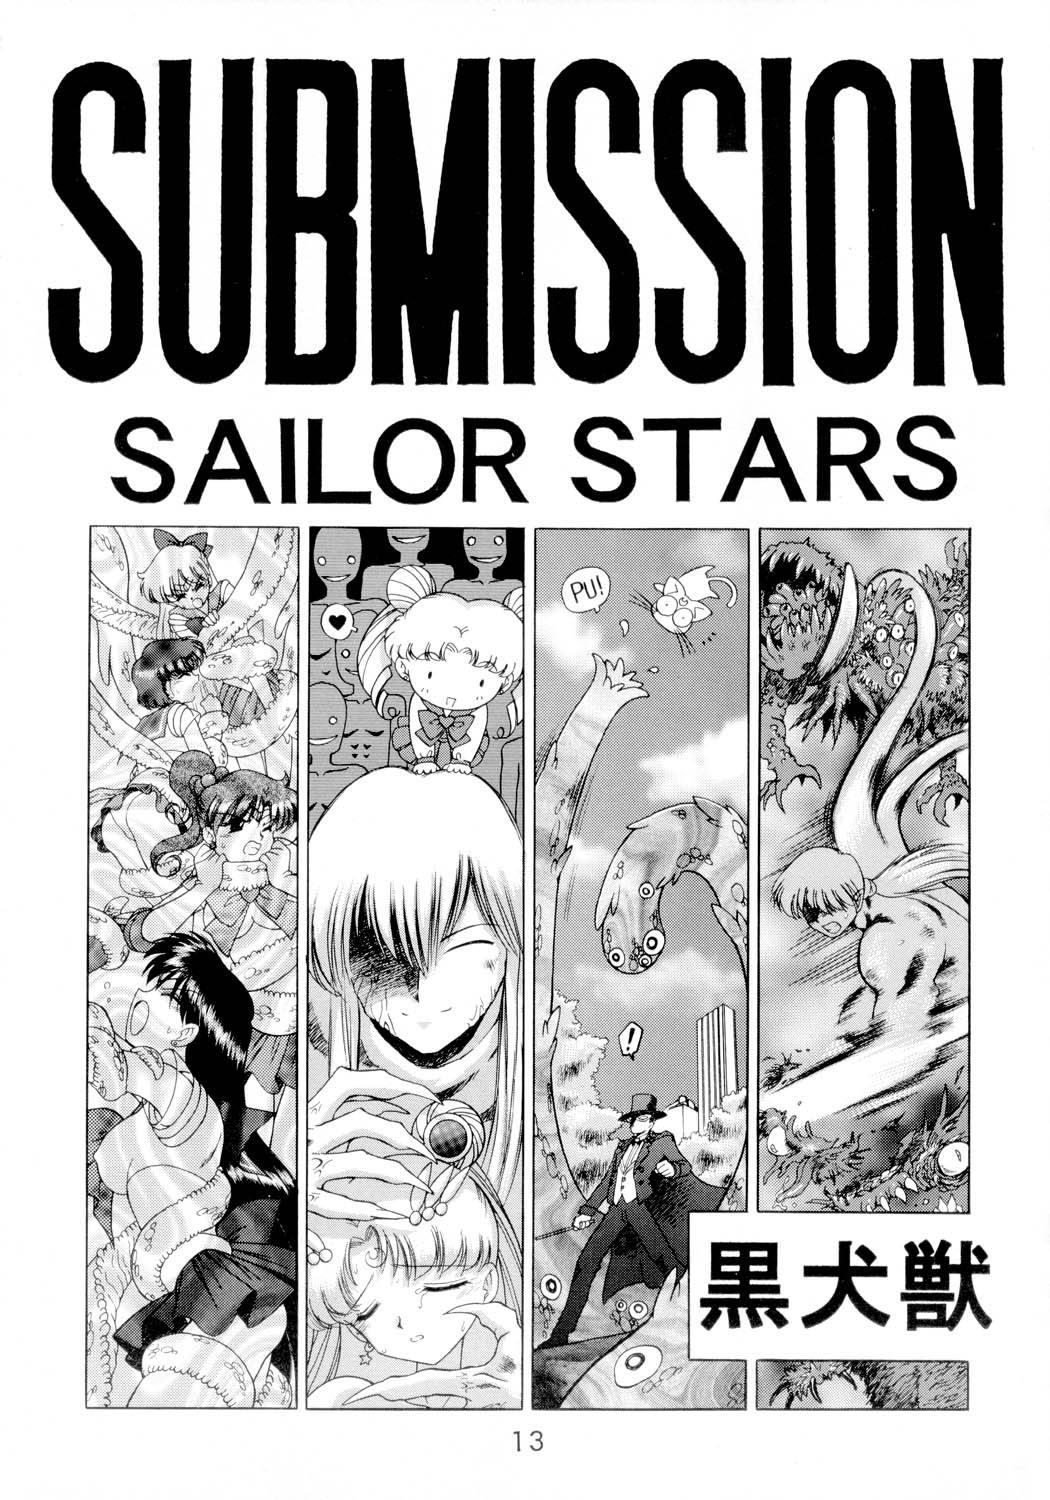 Hot Pussy Submission Sailorstars - Sailor moon Maledom - Page 12